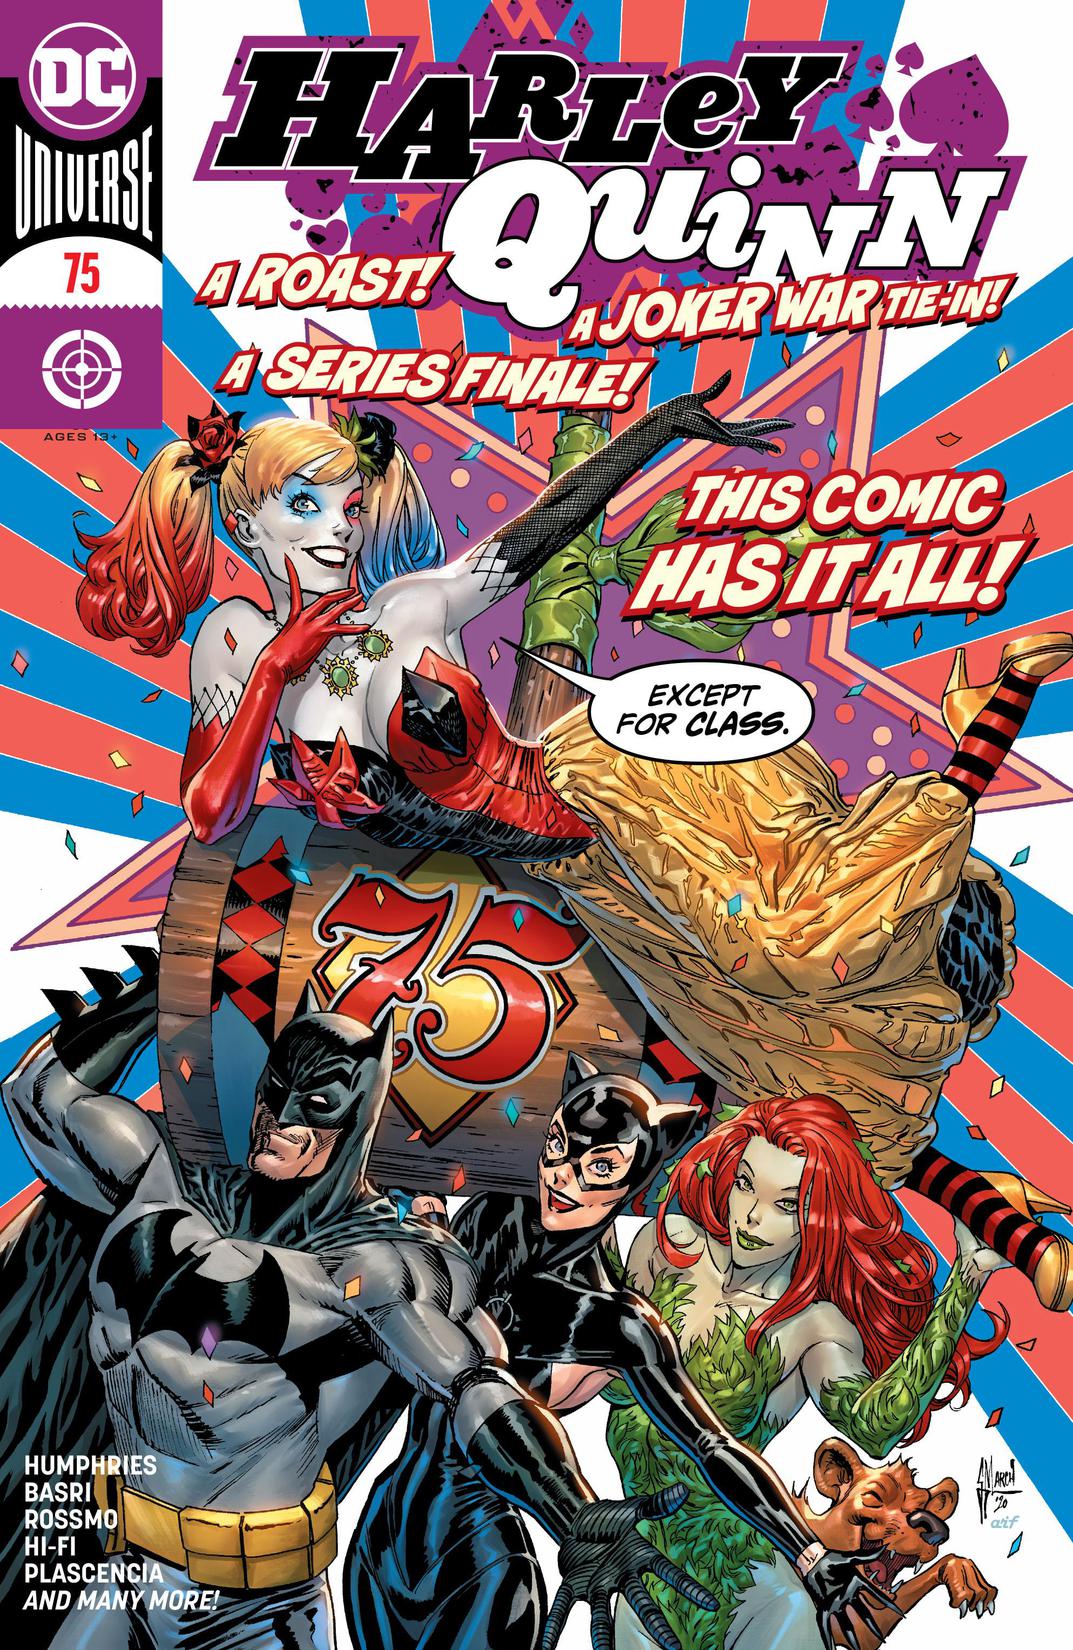 Harley Quinn (2016-) #75 preview images